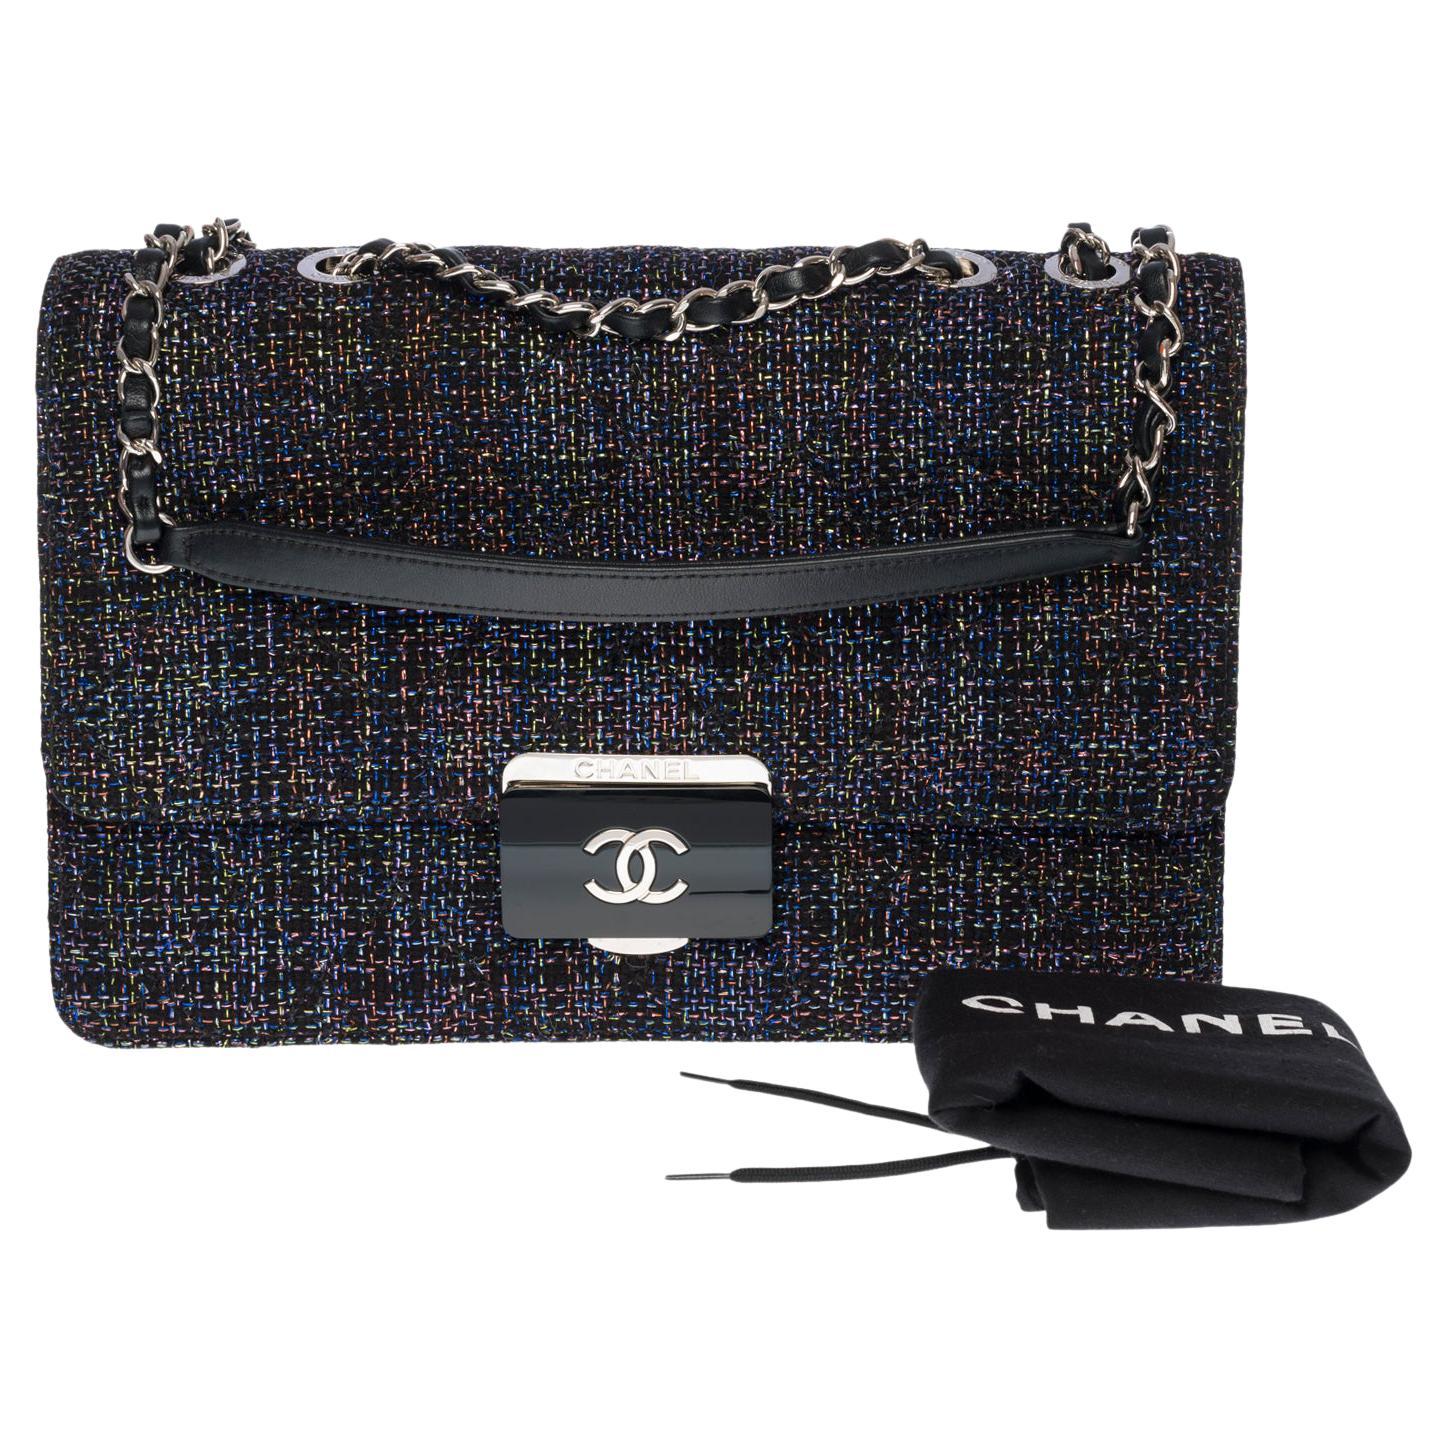 Splendid Very chic and Rare Chanel Classic Flap bag in Tweed embroidered with multicolored glittery threads, silver metal hardware, a silver metal chain handle interlaced with black leather for a shoulder or shoulder strap

CC closure in silver